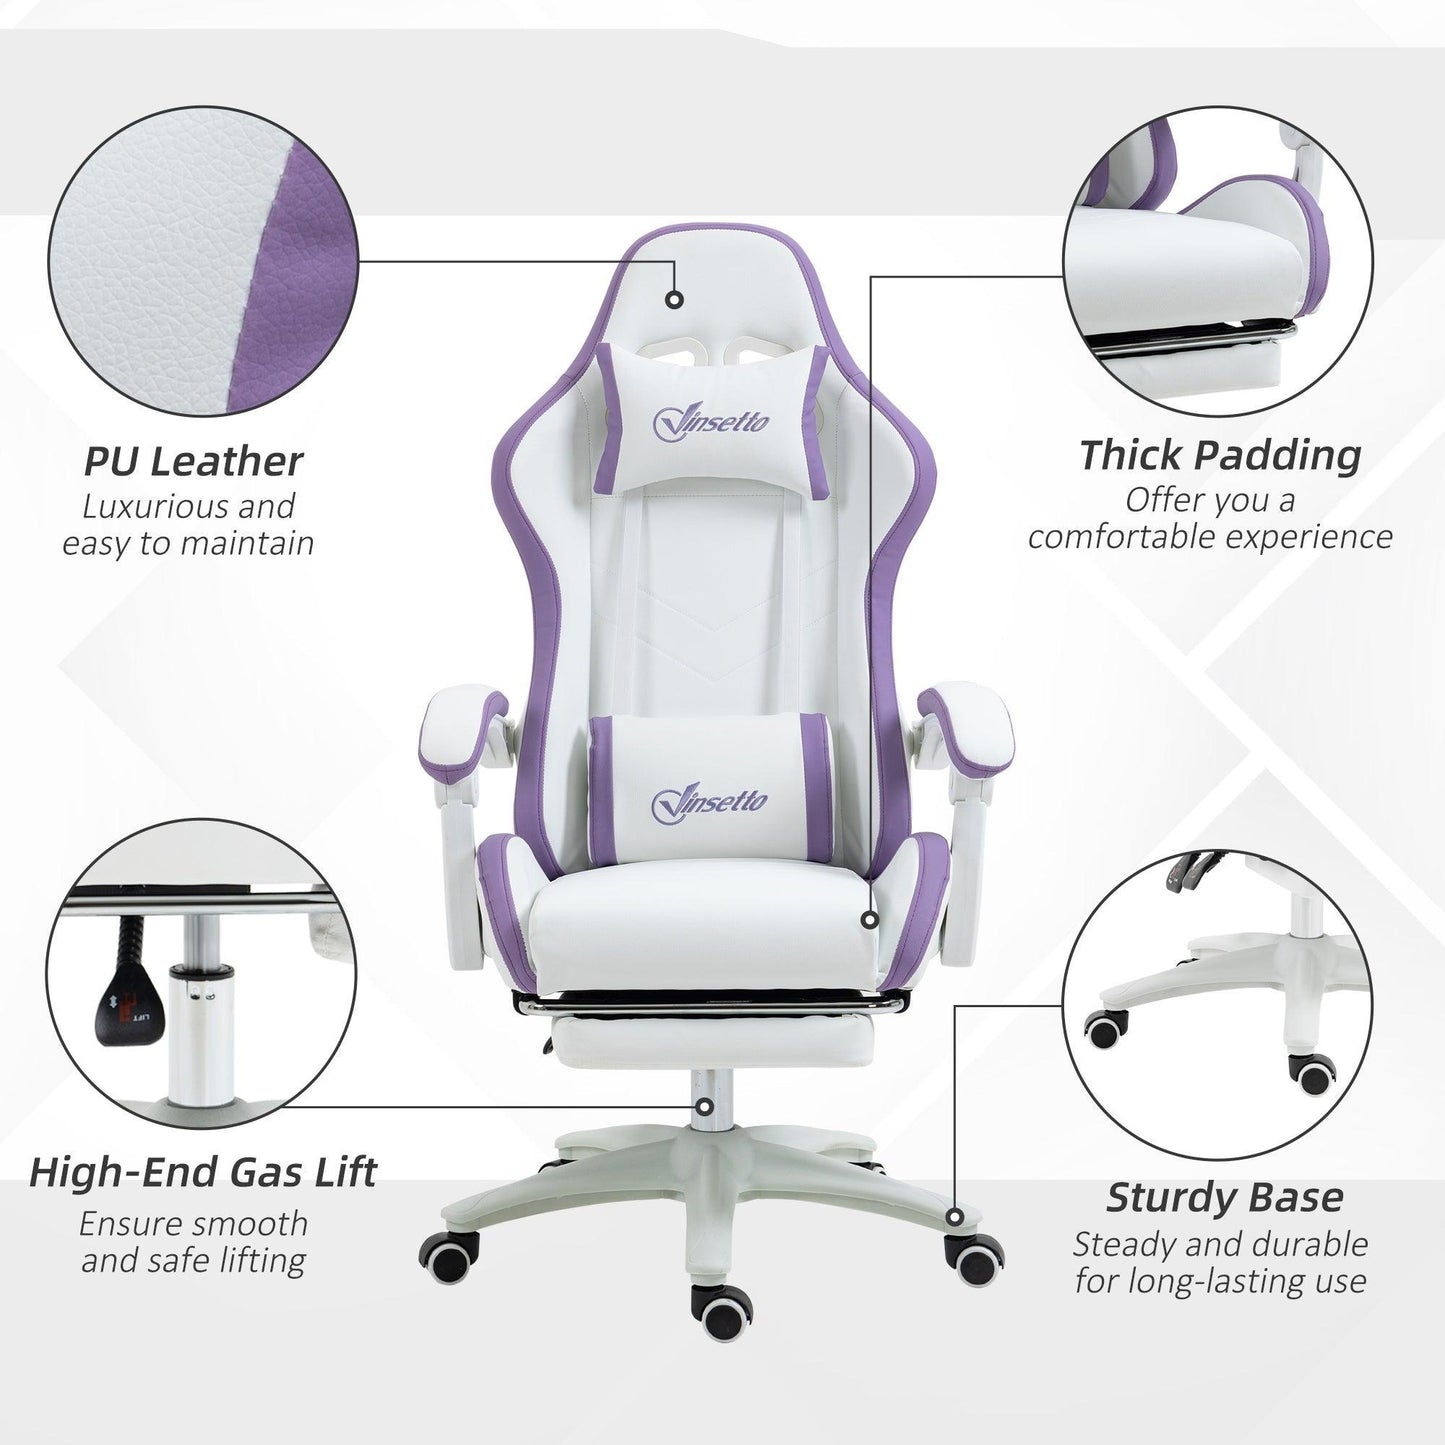 Vinsetto Purple Gaming Chair with Reclining Seat & Footrest - ALL4U RETAILER LTD